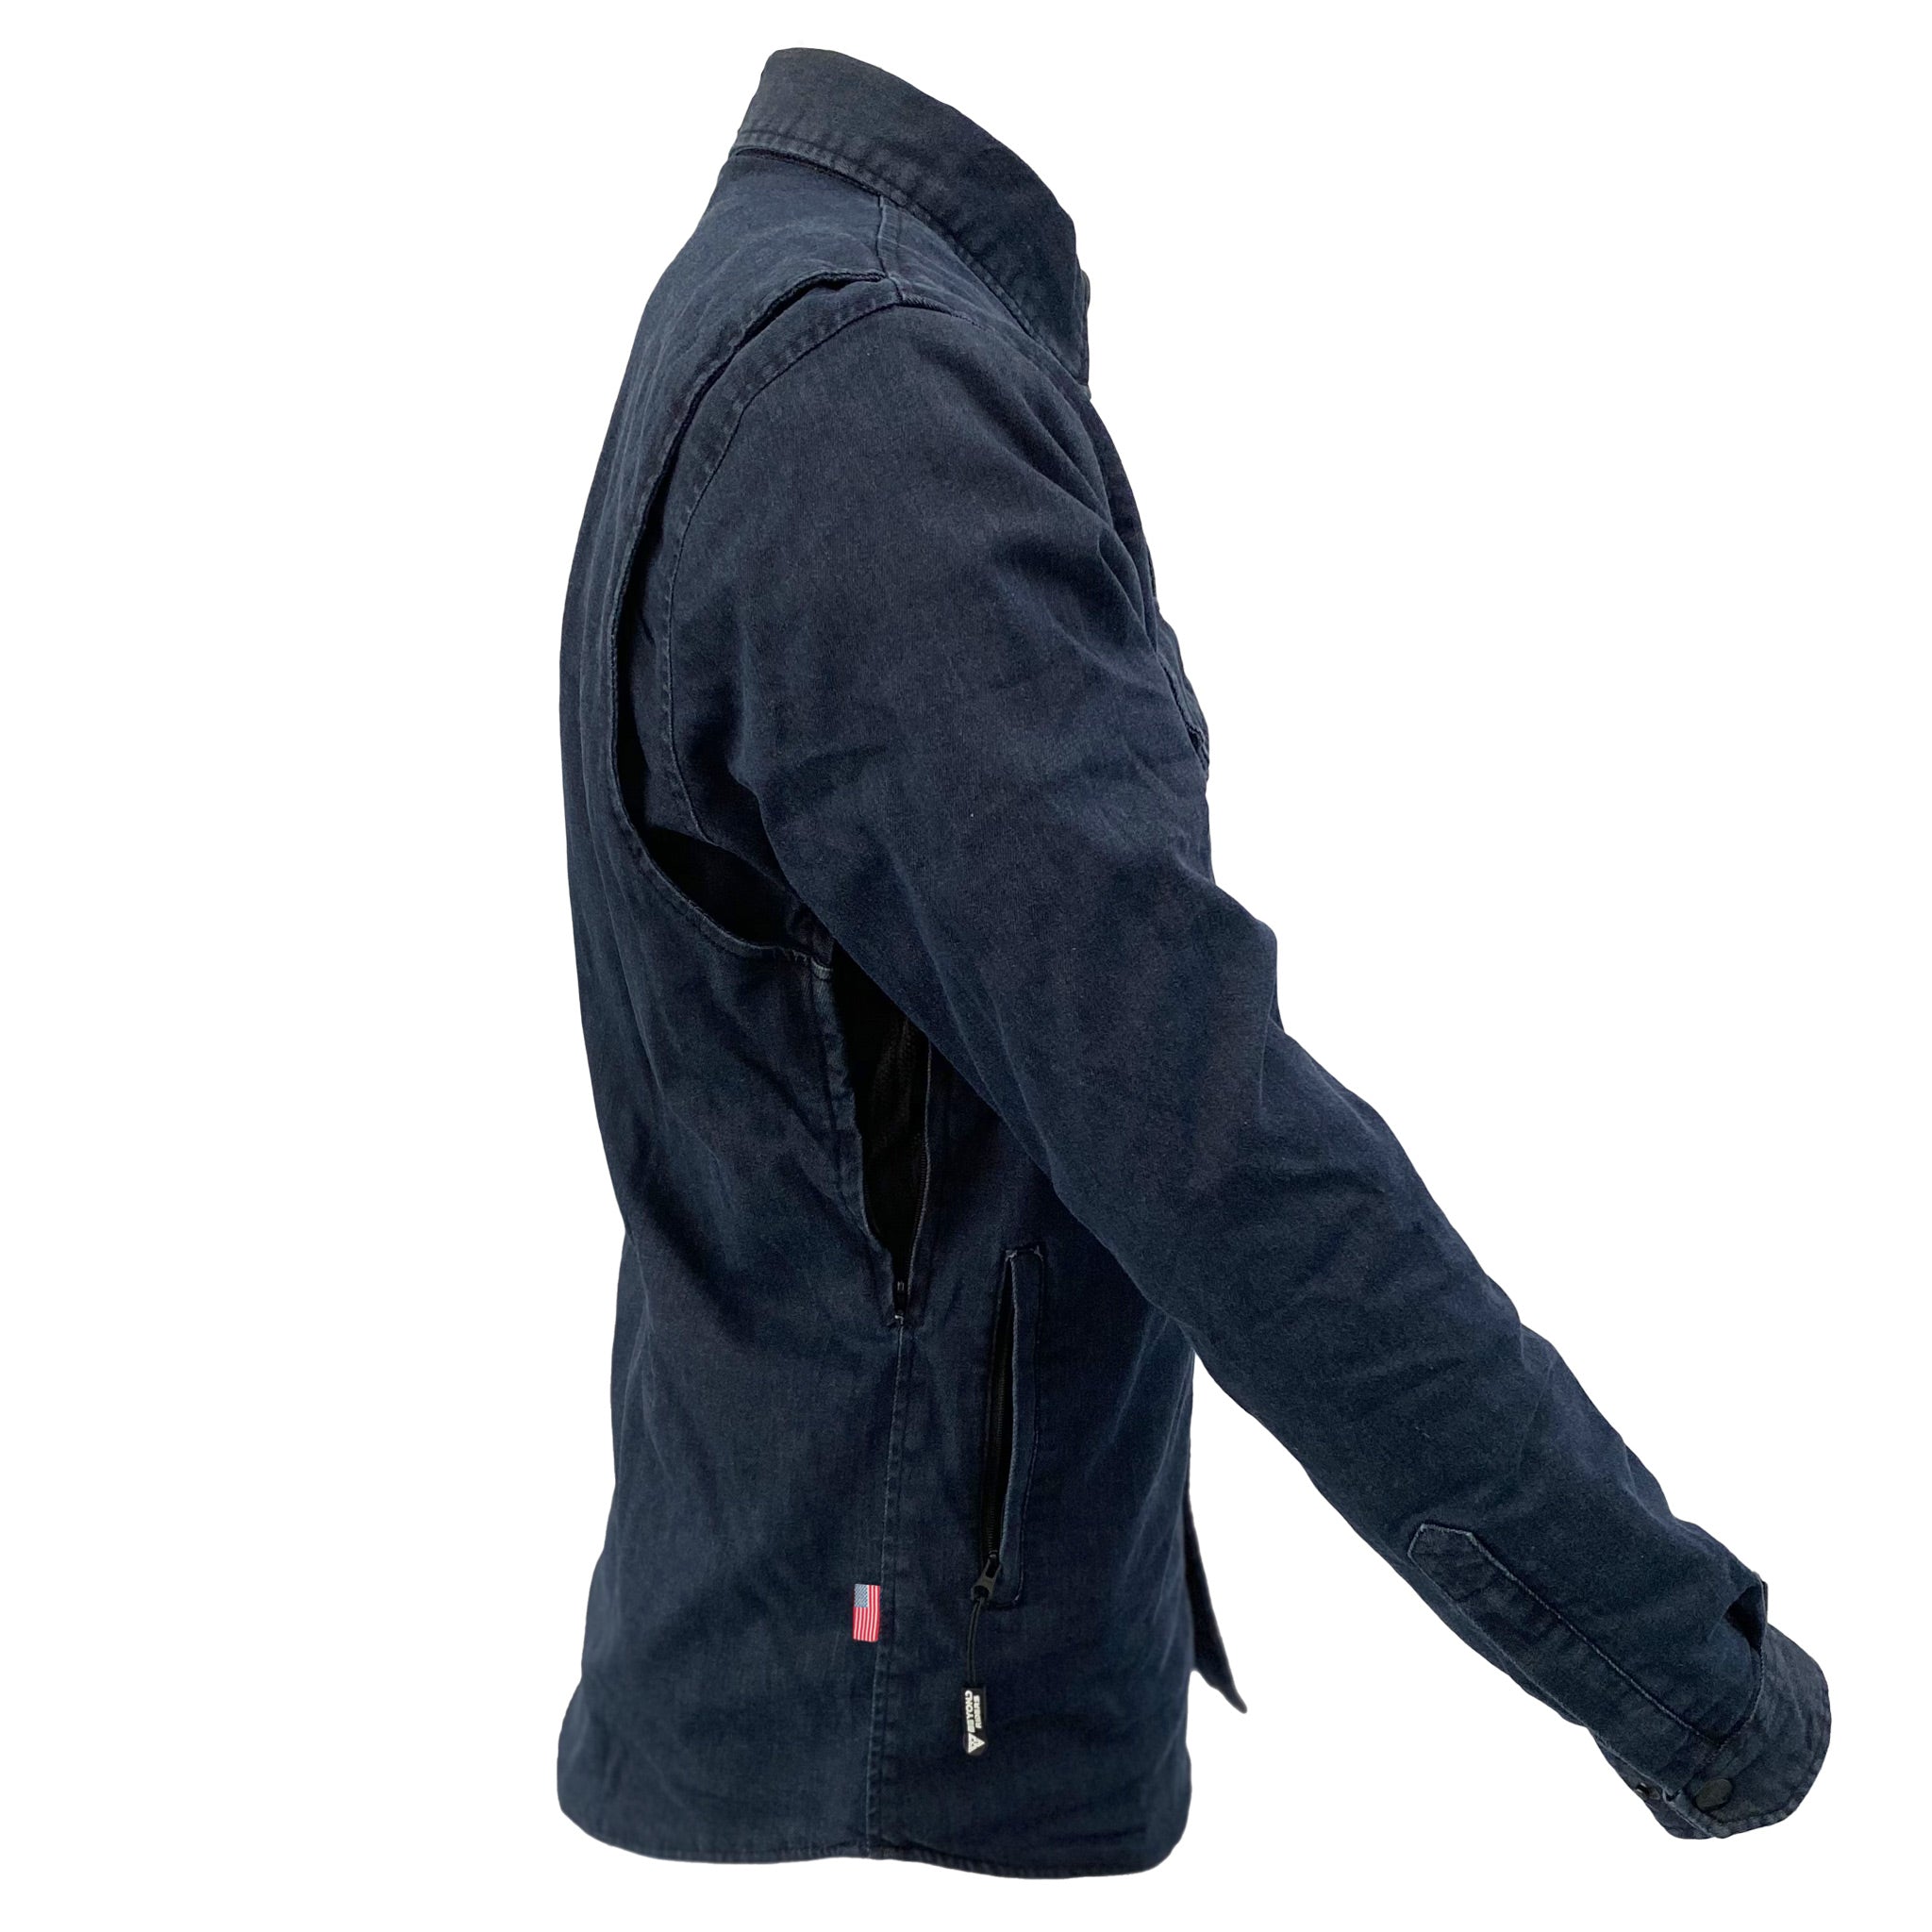 SALE Protective Jeans Jacket - Blue Indigo with Pads